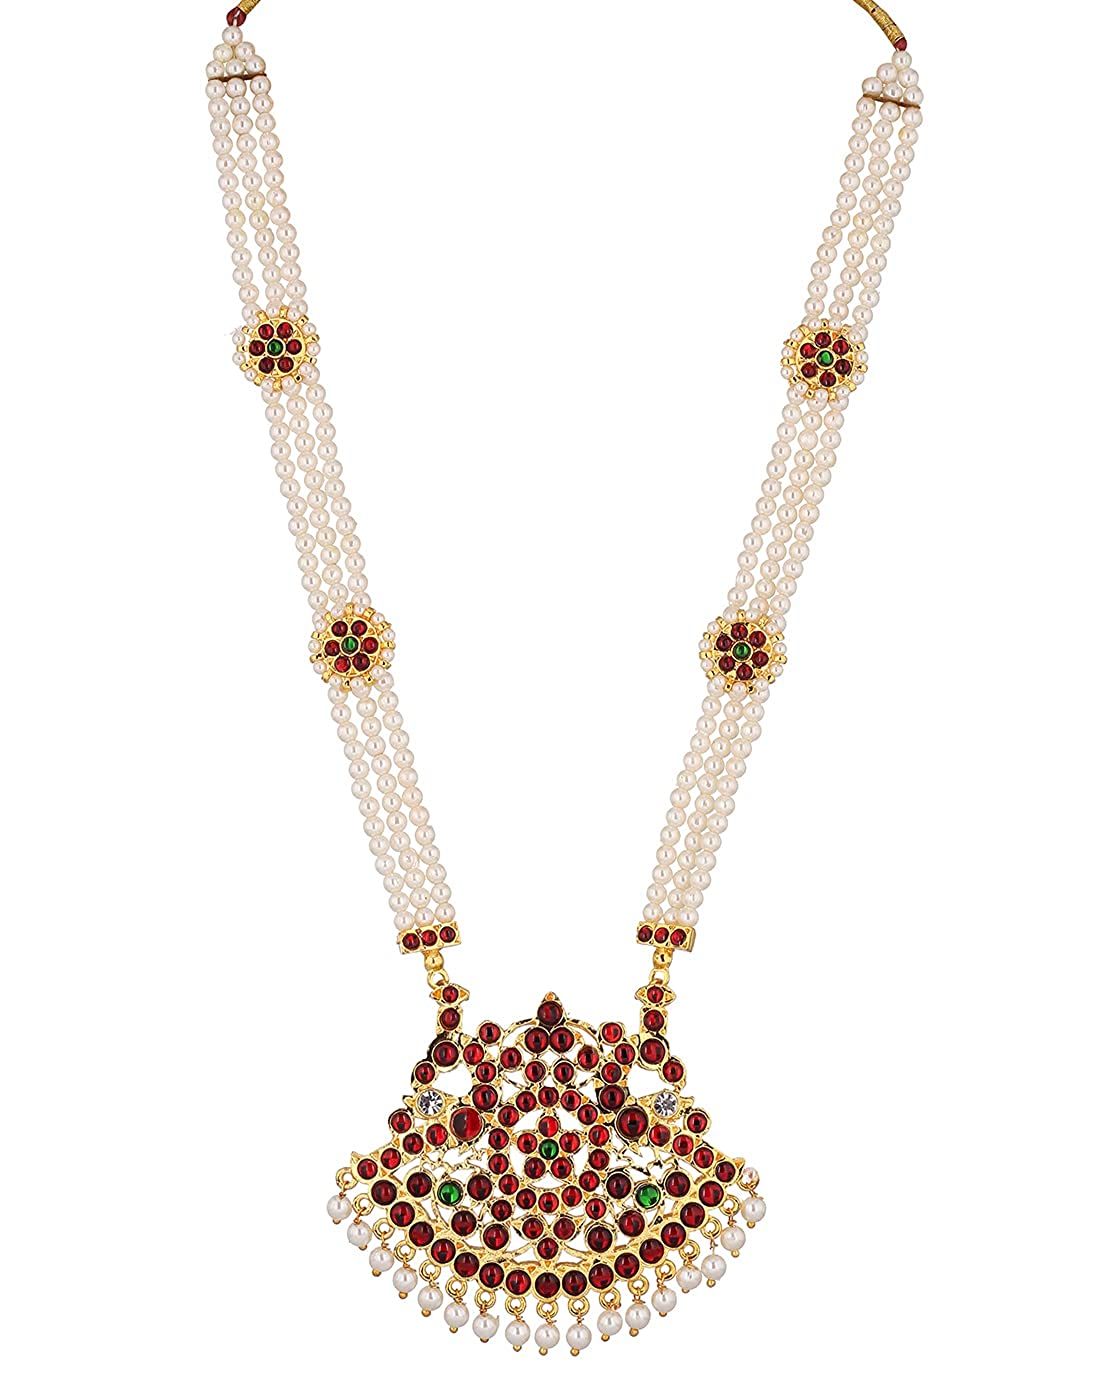 Bharatanatyam Majestic Pearl Long Necklace- Goldencollections